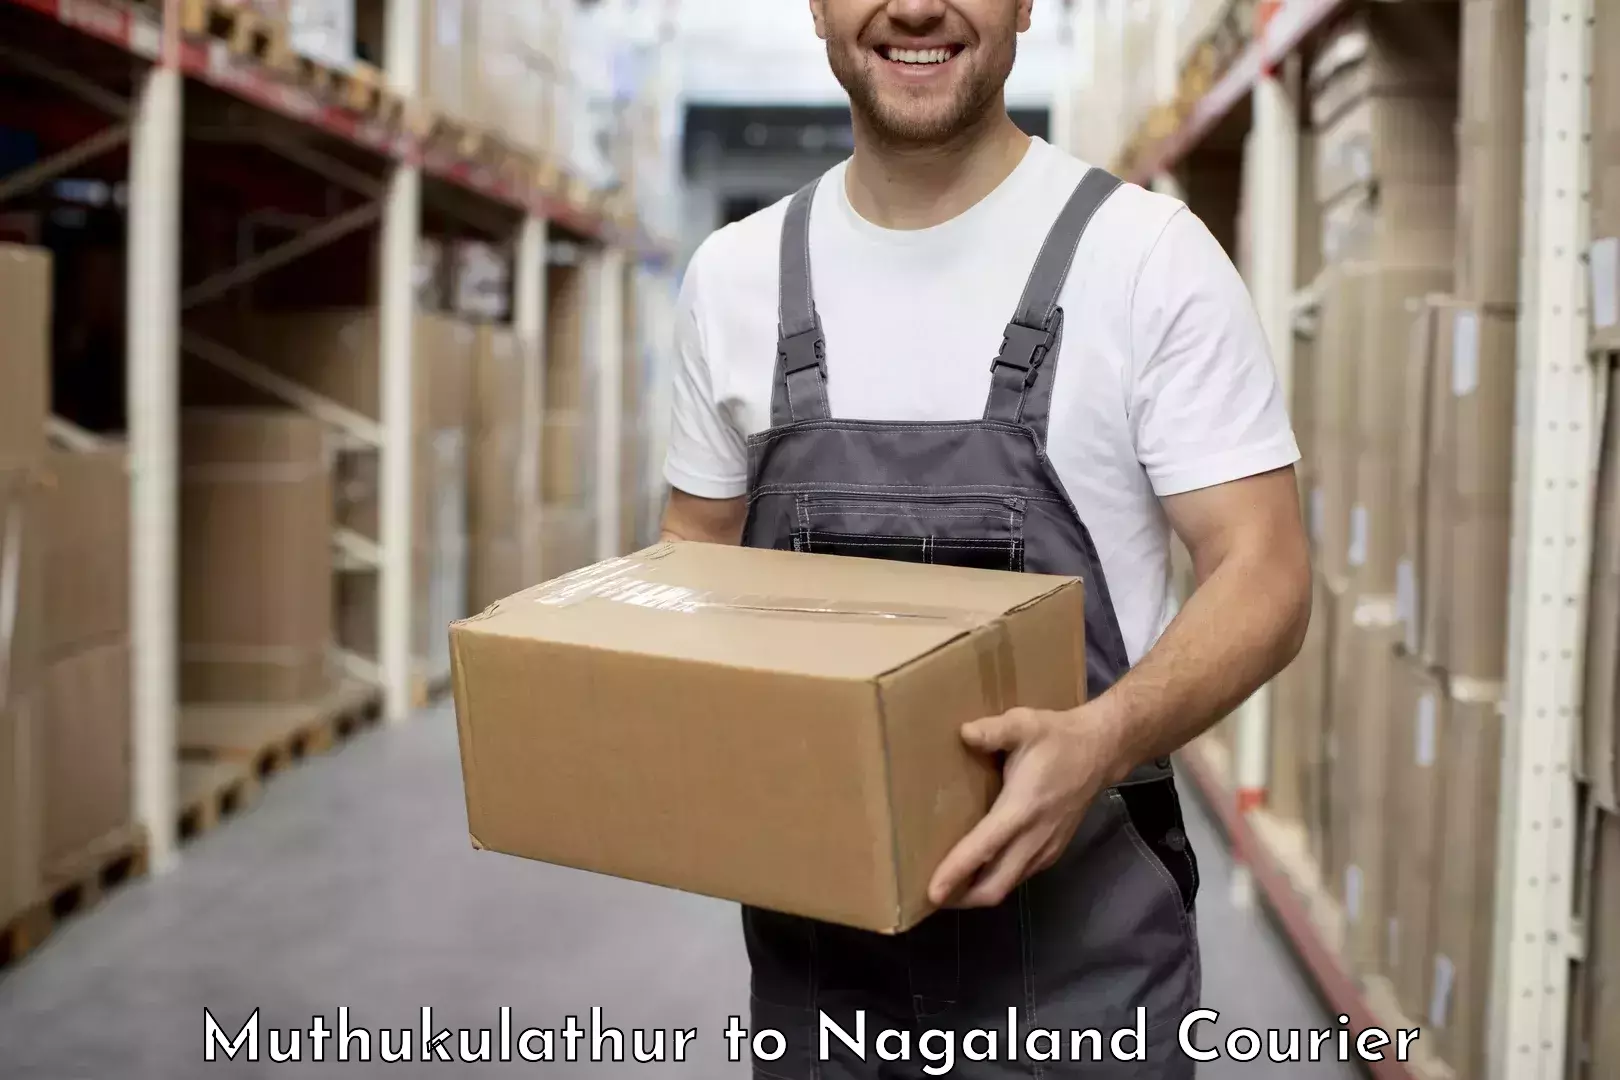 Customer-oriented courier services in Muthukulathur to NIT Nagaland